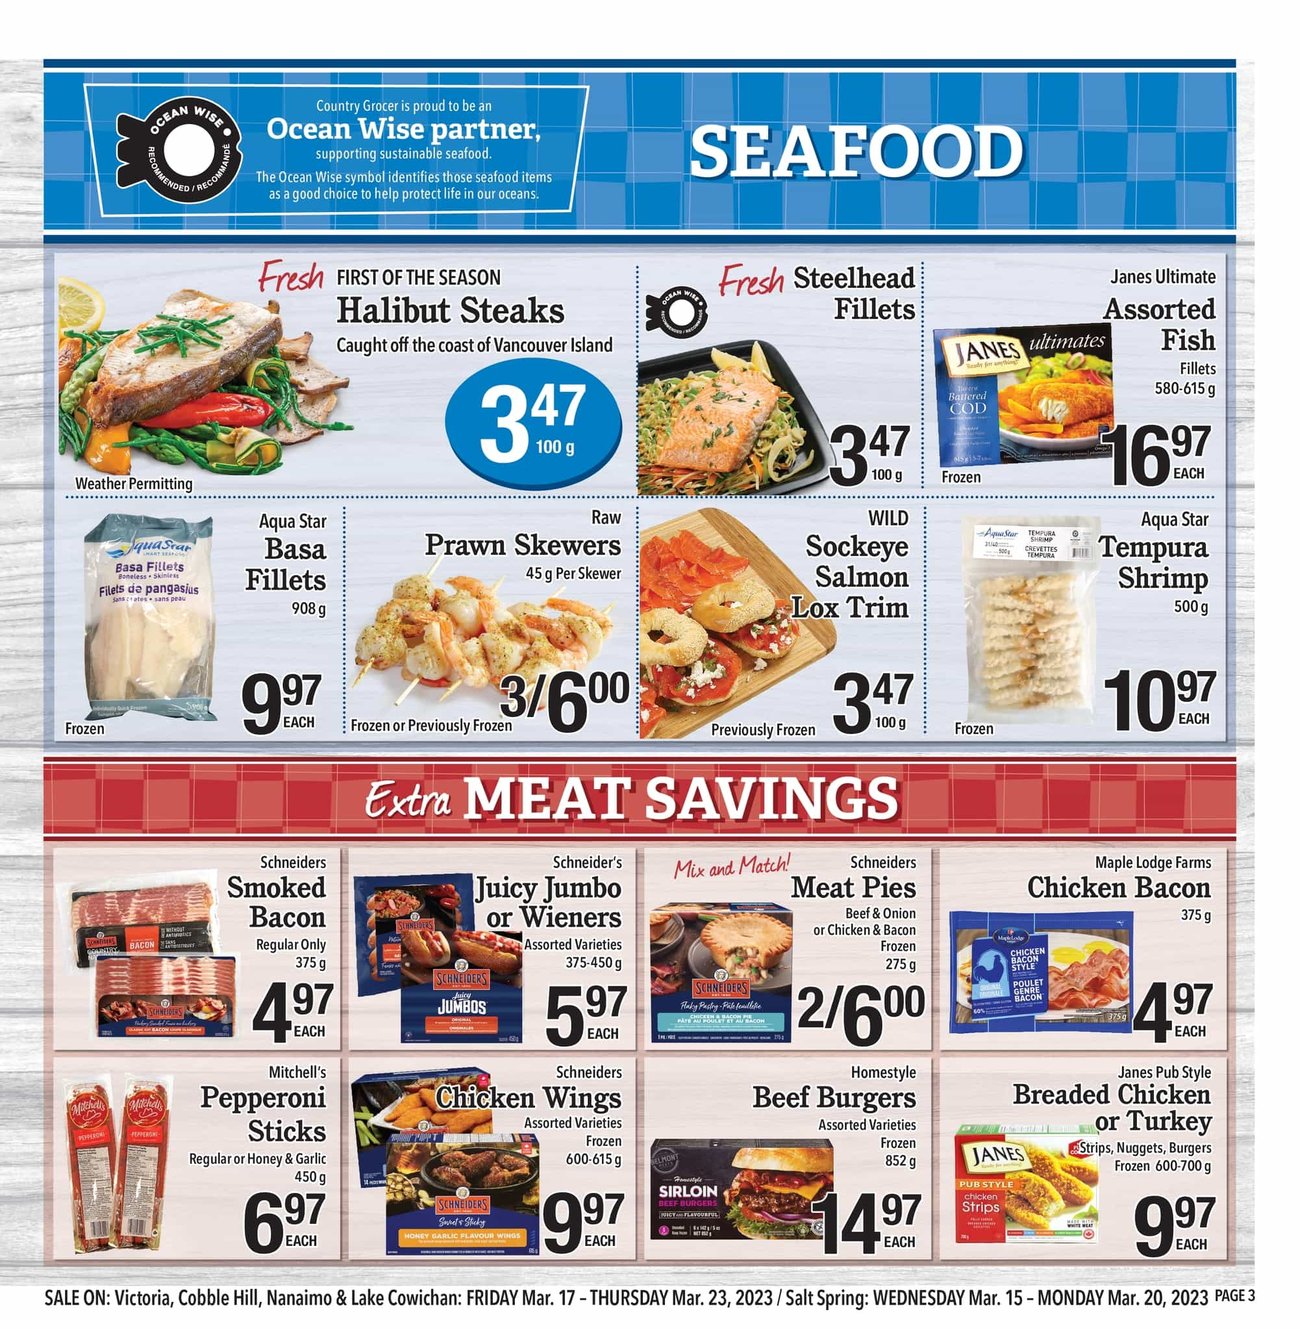 Country Grocer - Weekly Flyer Specials - Page 3